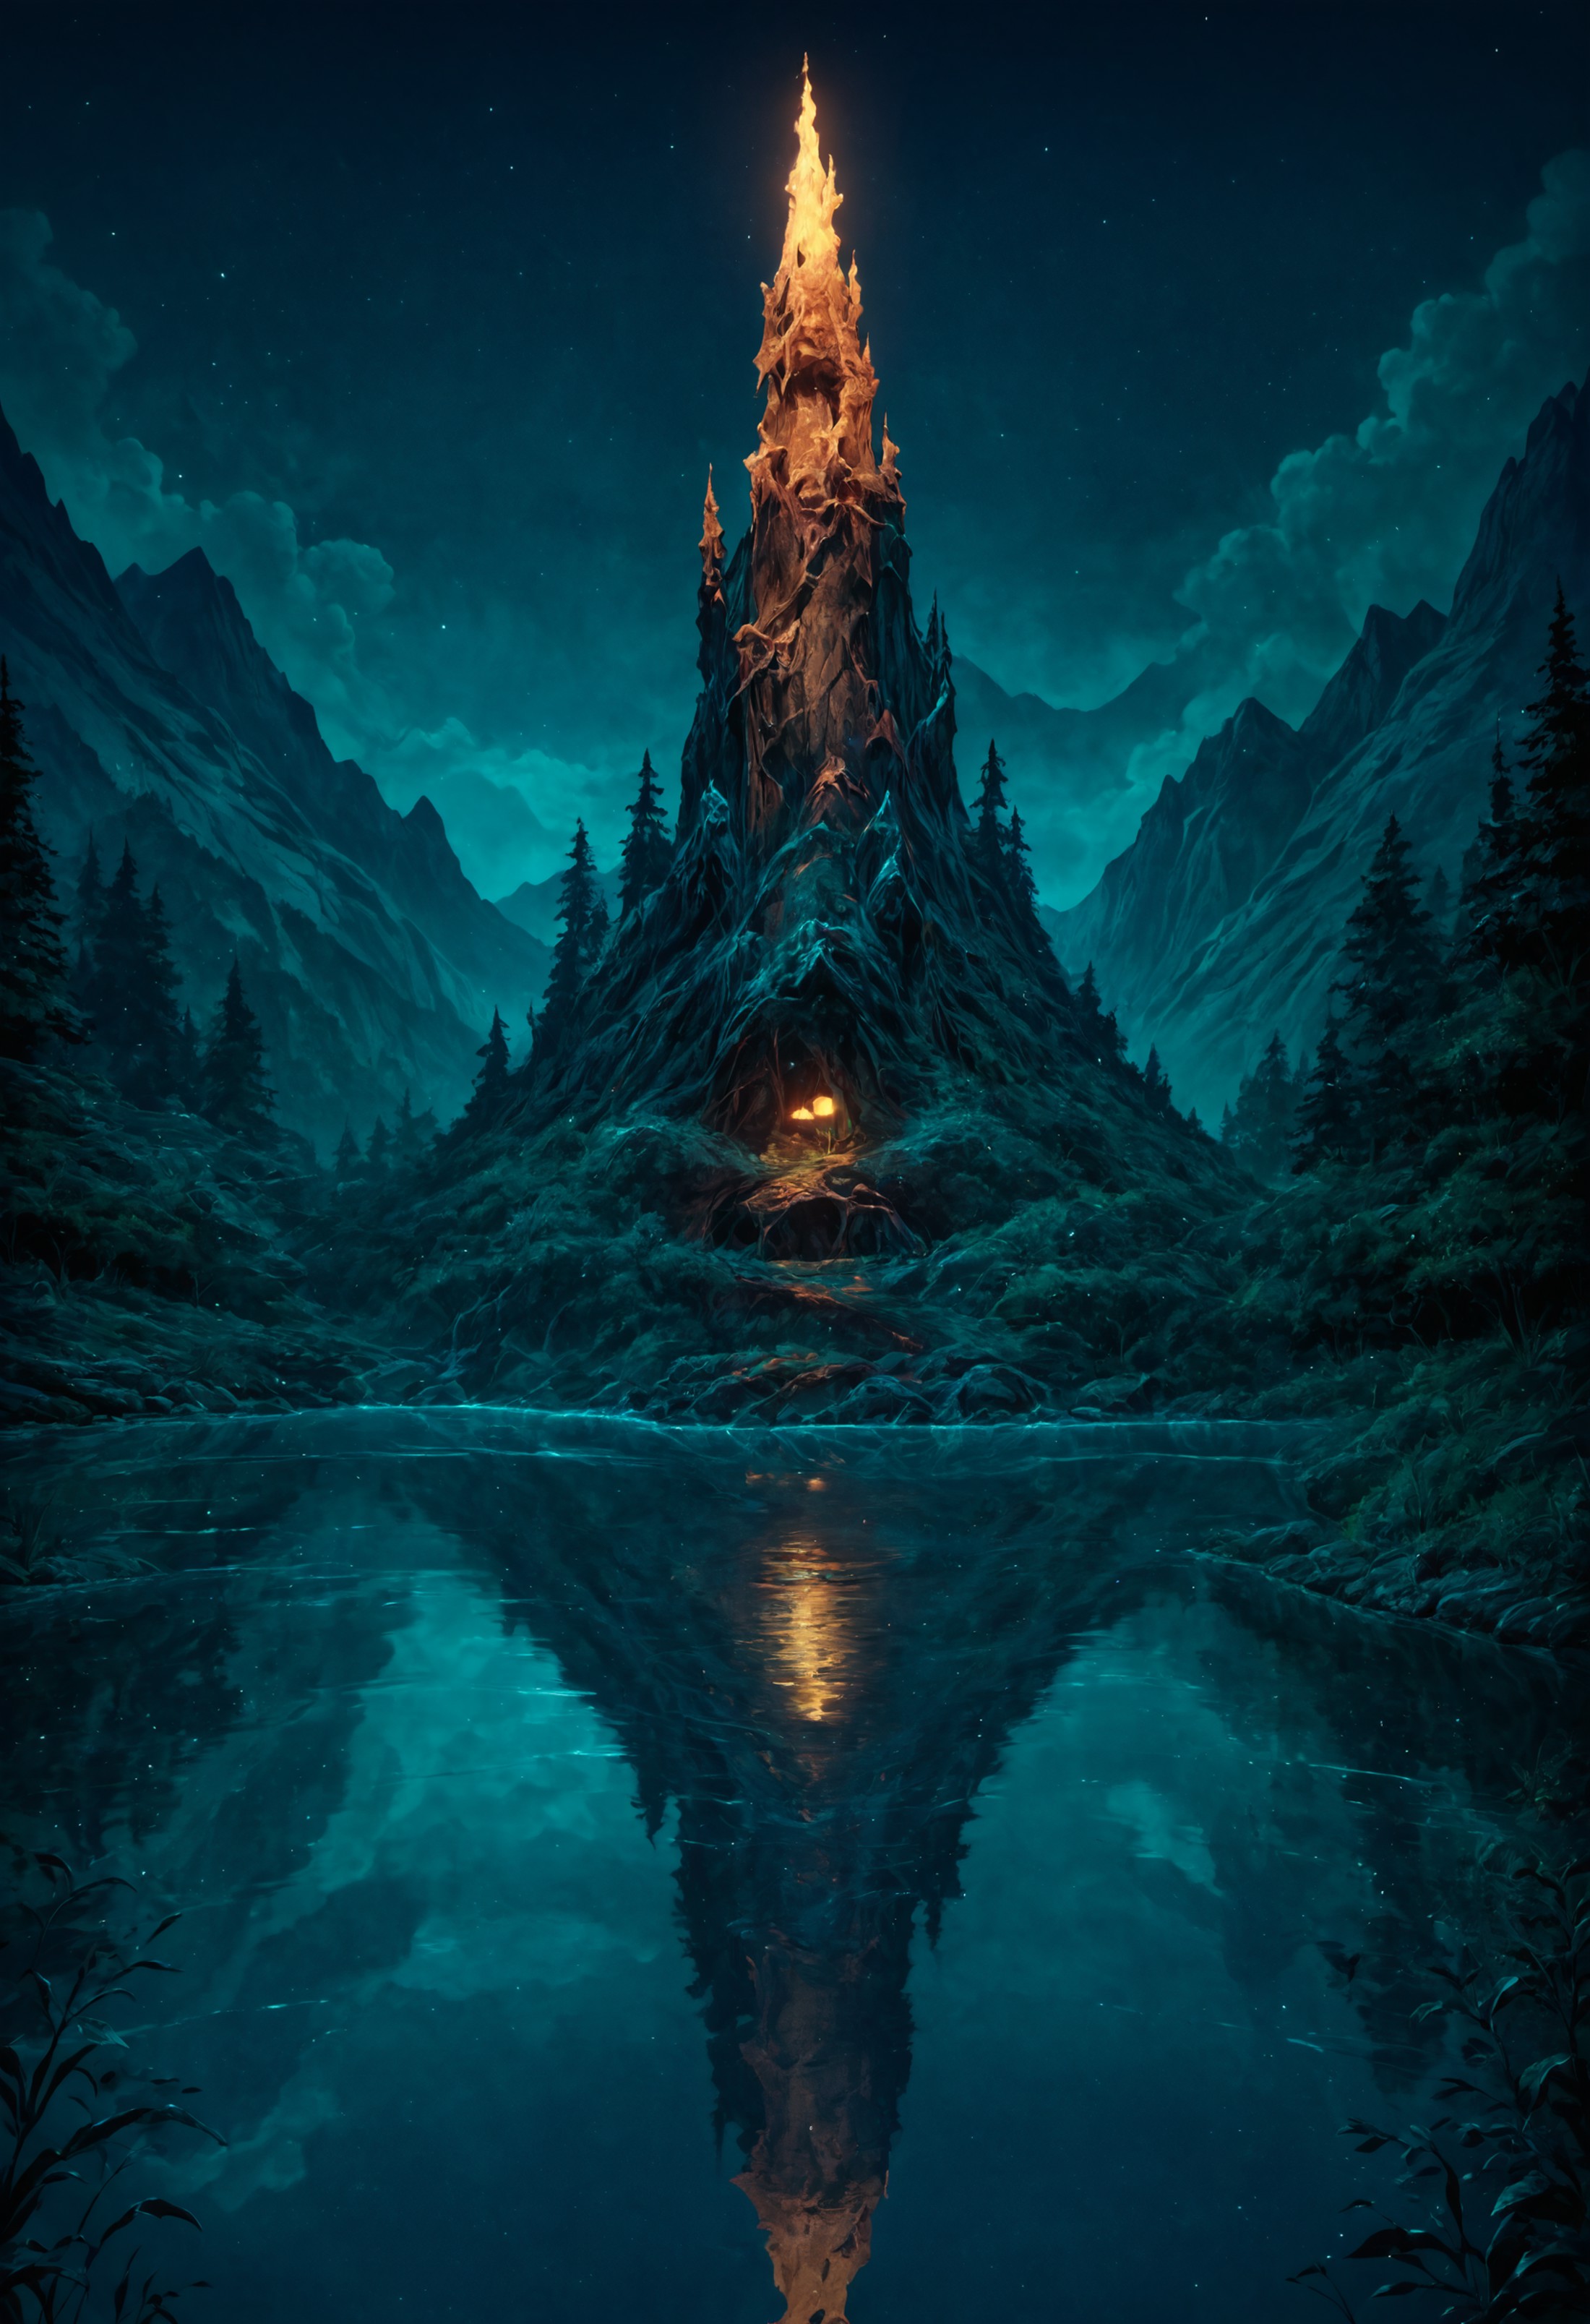 score_9, score_8_up, score_7_up, detailed, night, (dark environment), mountains, water, trees, no humans, reflection,